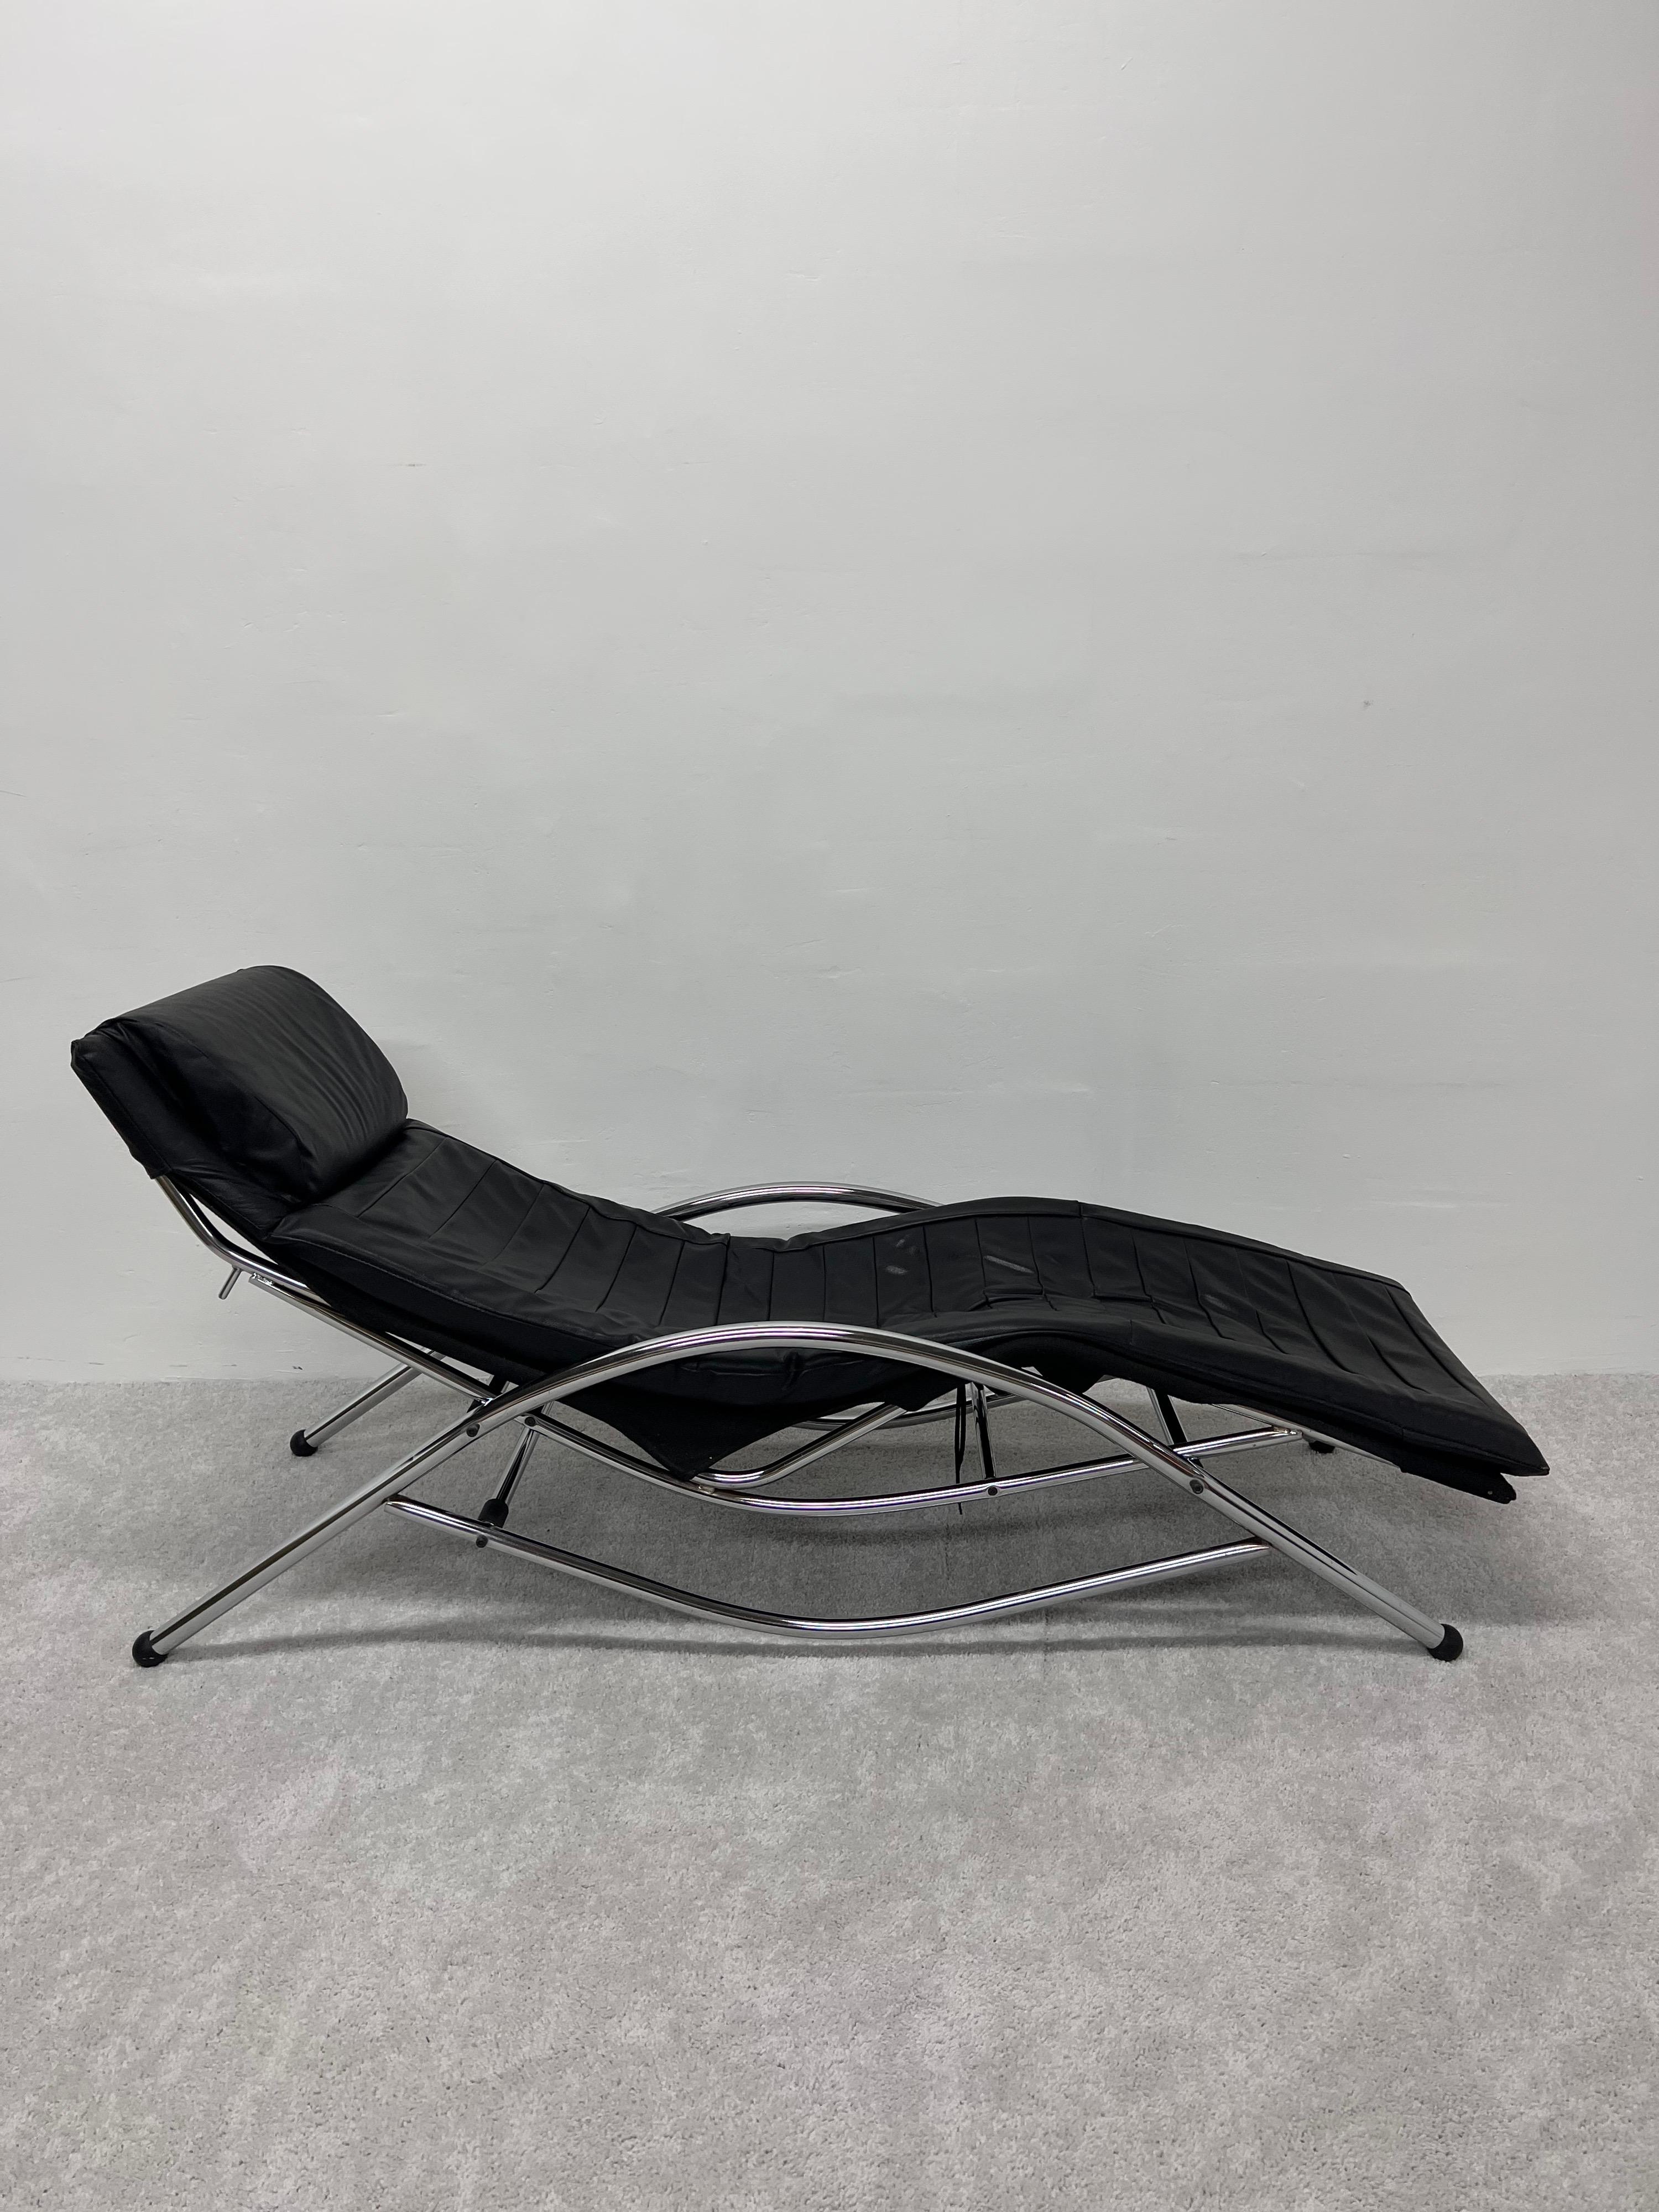 Black leather seat and pillow on tubular chrome adjustable frame chaise lounge, Italy 1980s.